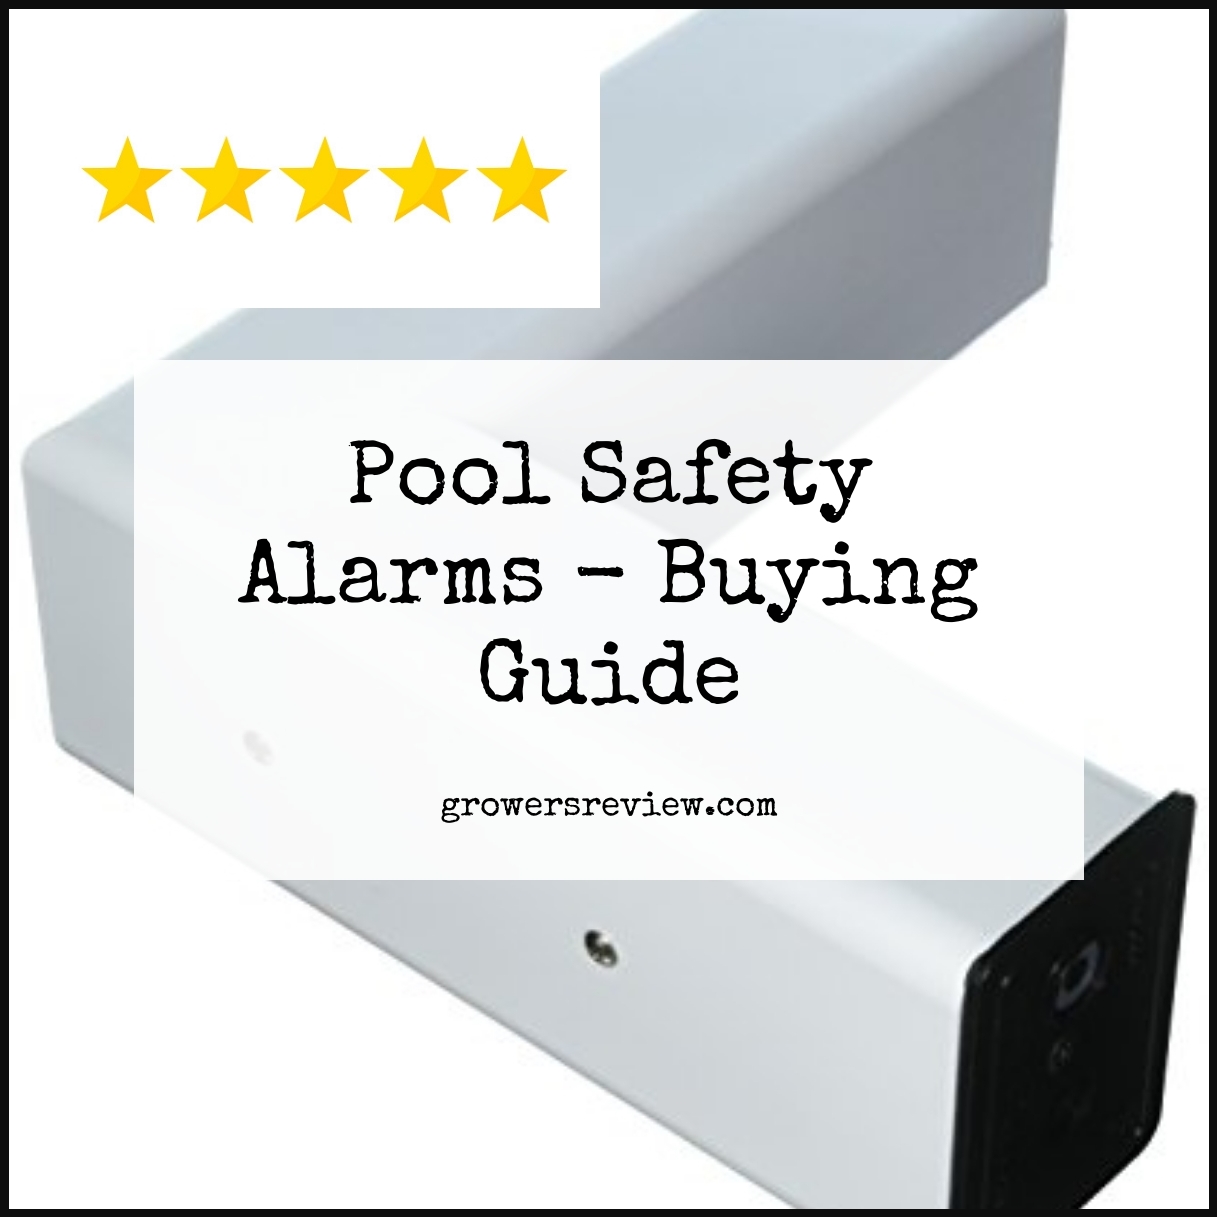 Pool Safety Alarms - Buying Guide